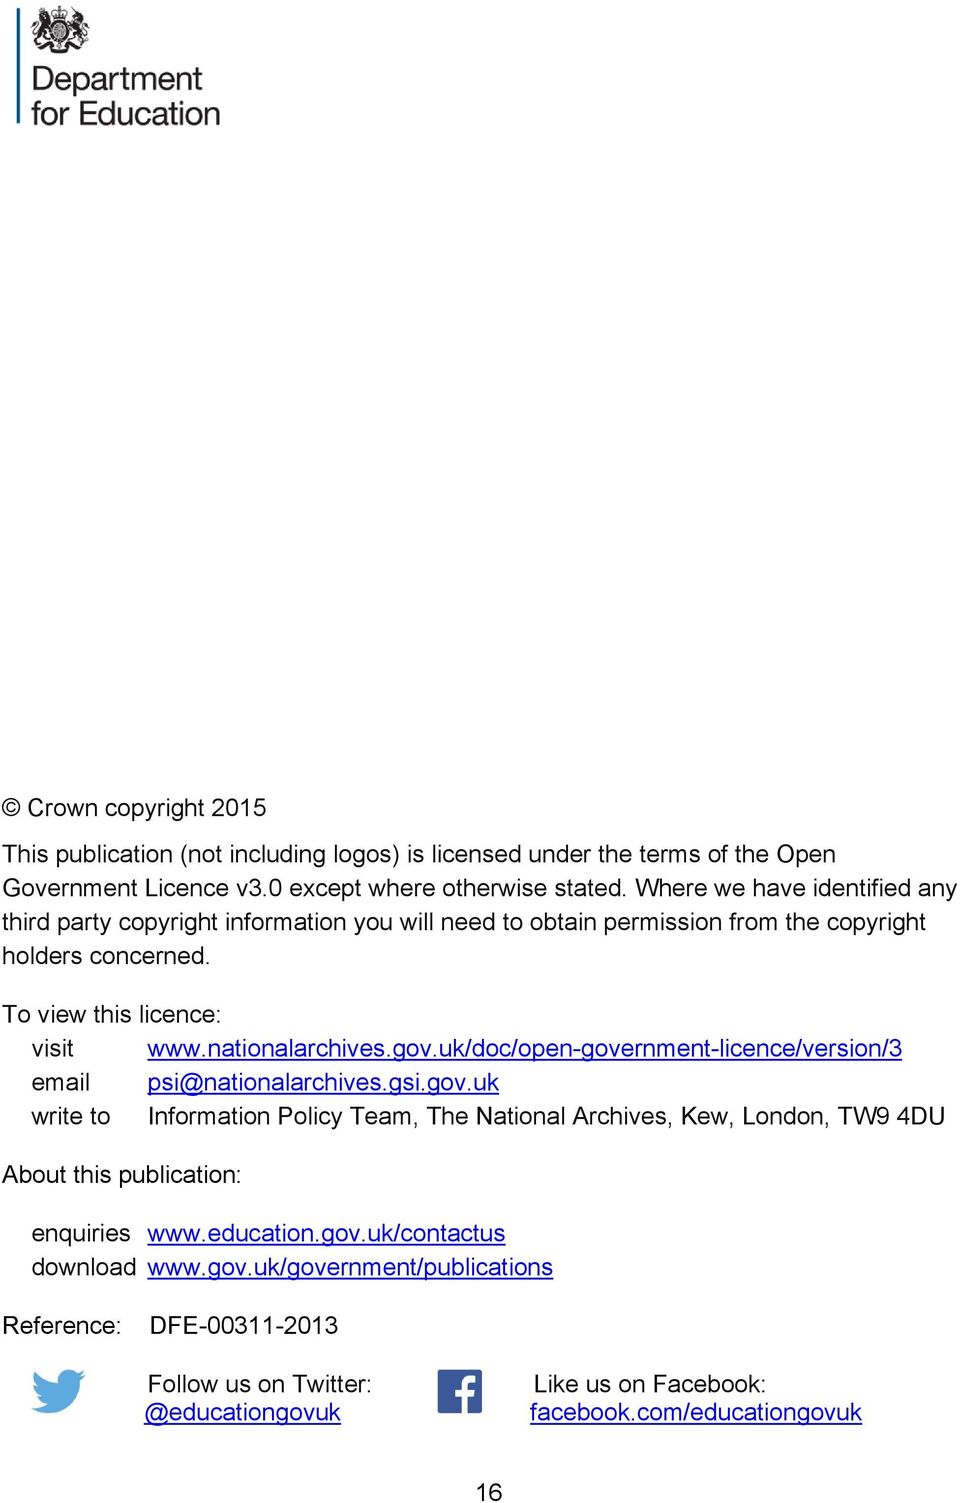 nationalarchives.gov.uk/doc/open-government-licence/version/3 email psi@nationalarchives.gsi.gov.uk write to Information Policy Team, The National Archives, Kew, London, TW9 4DU About this publication: enquiries www.